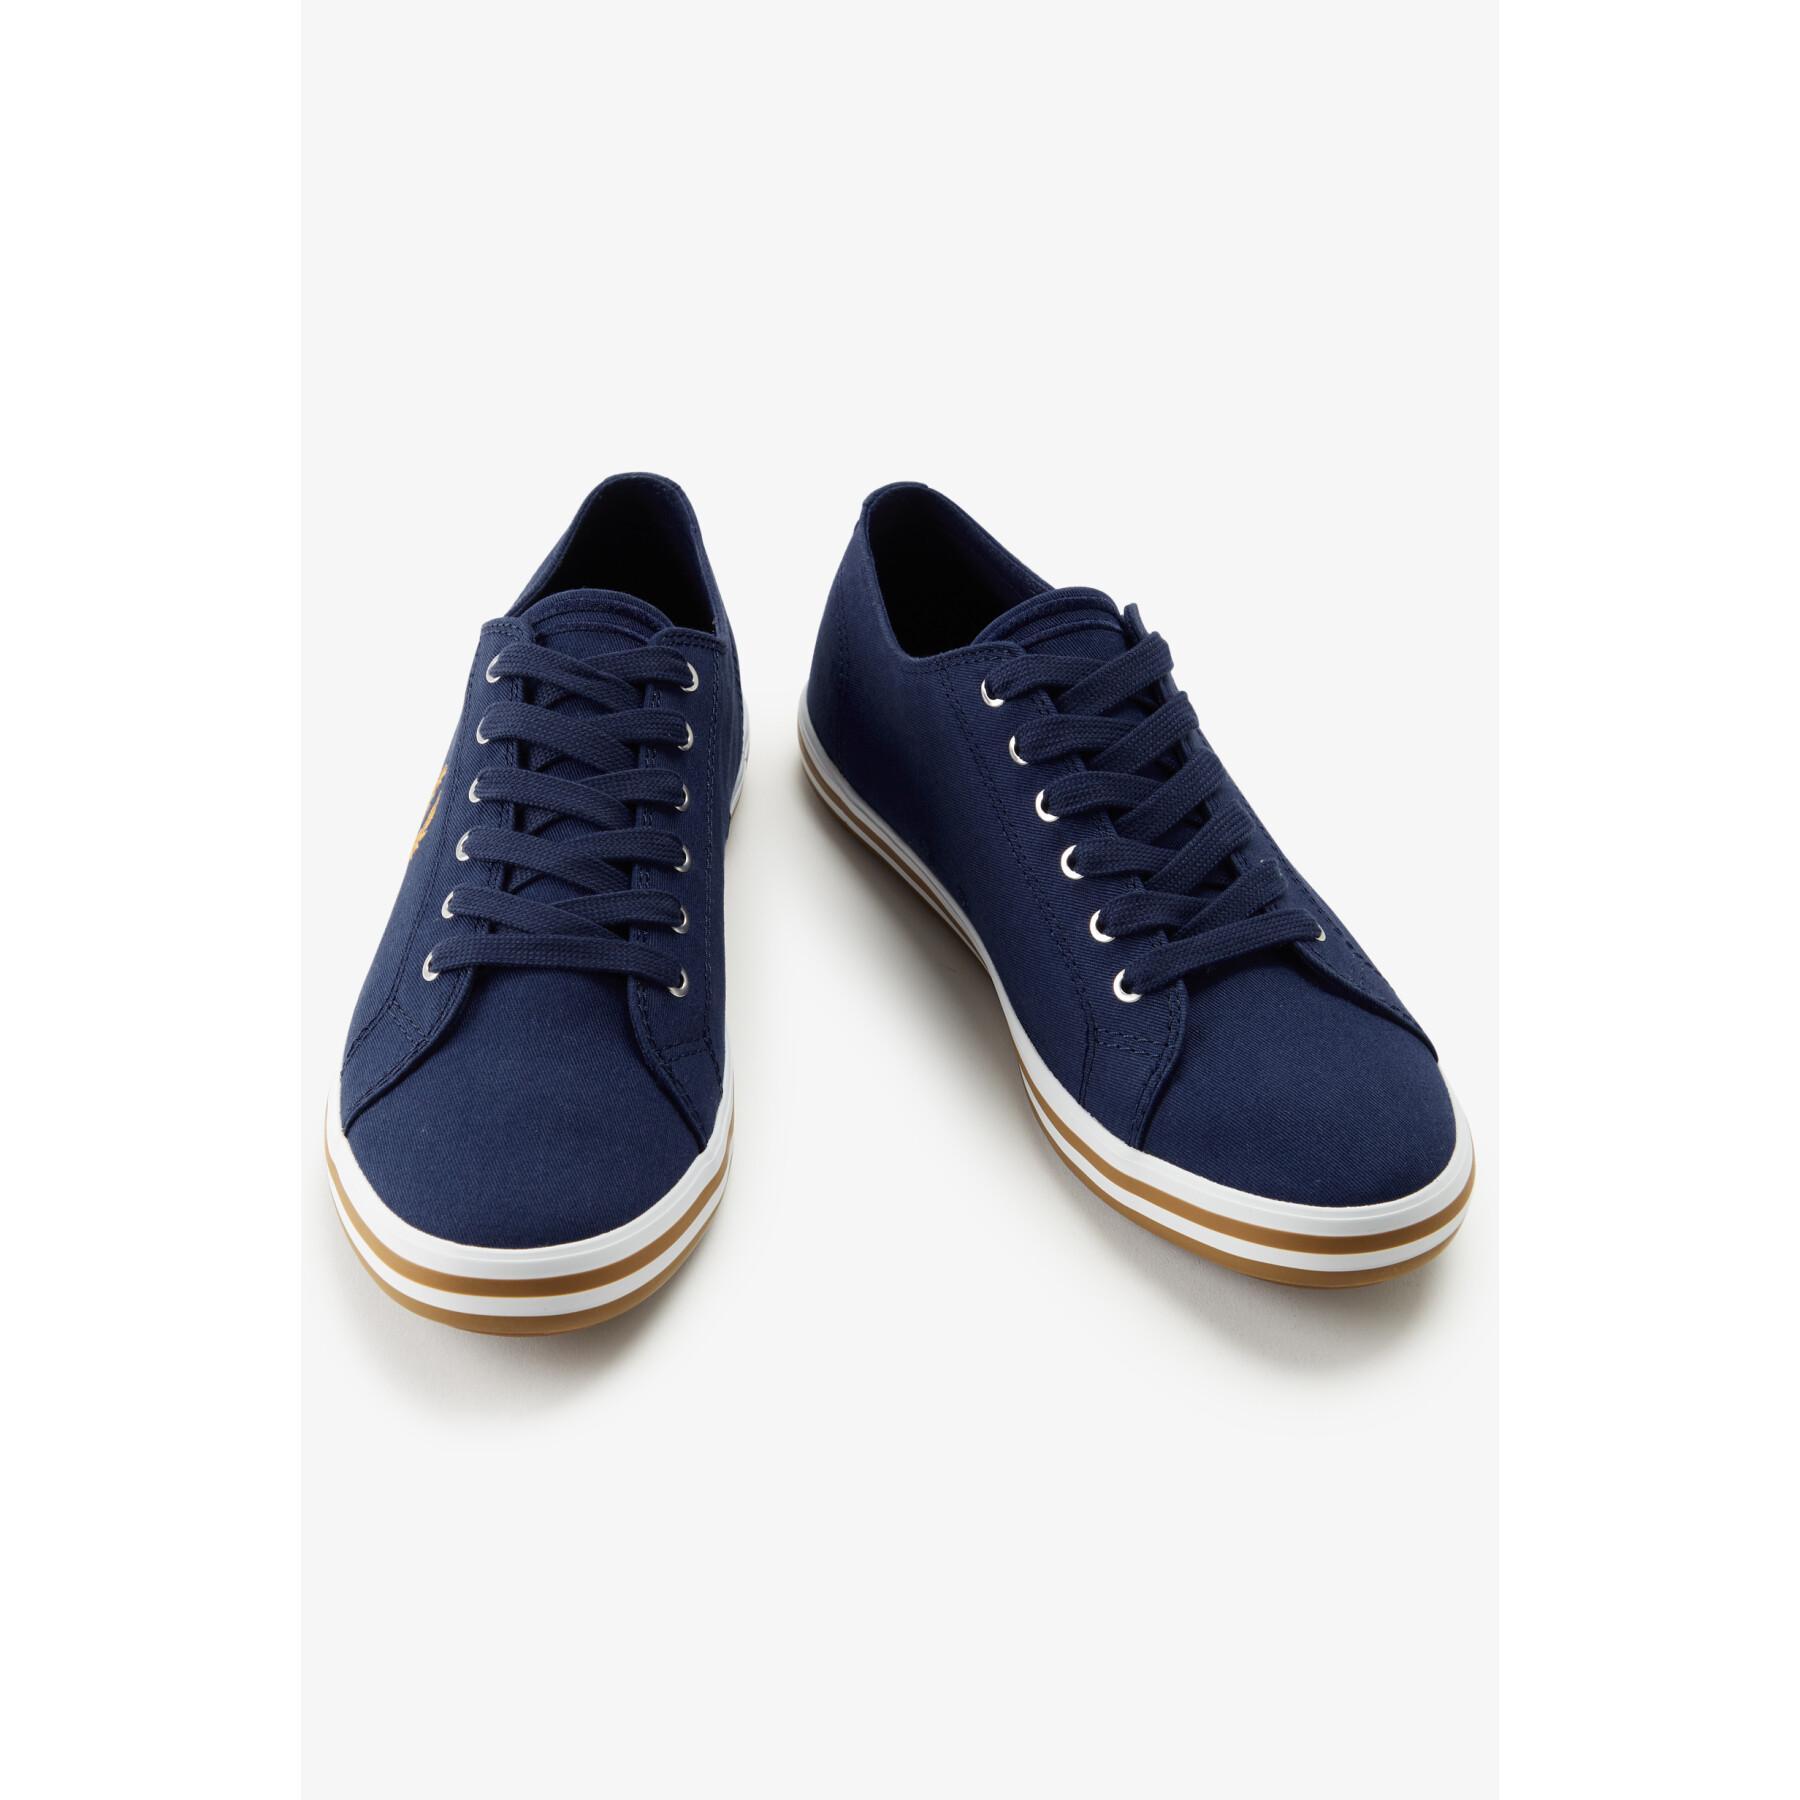 Formadores Fred Perry Kingston